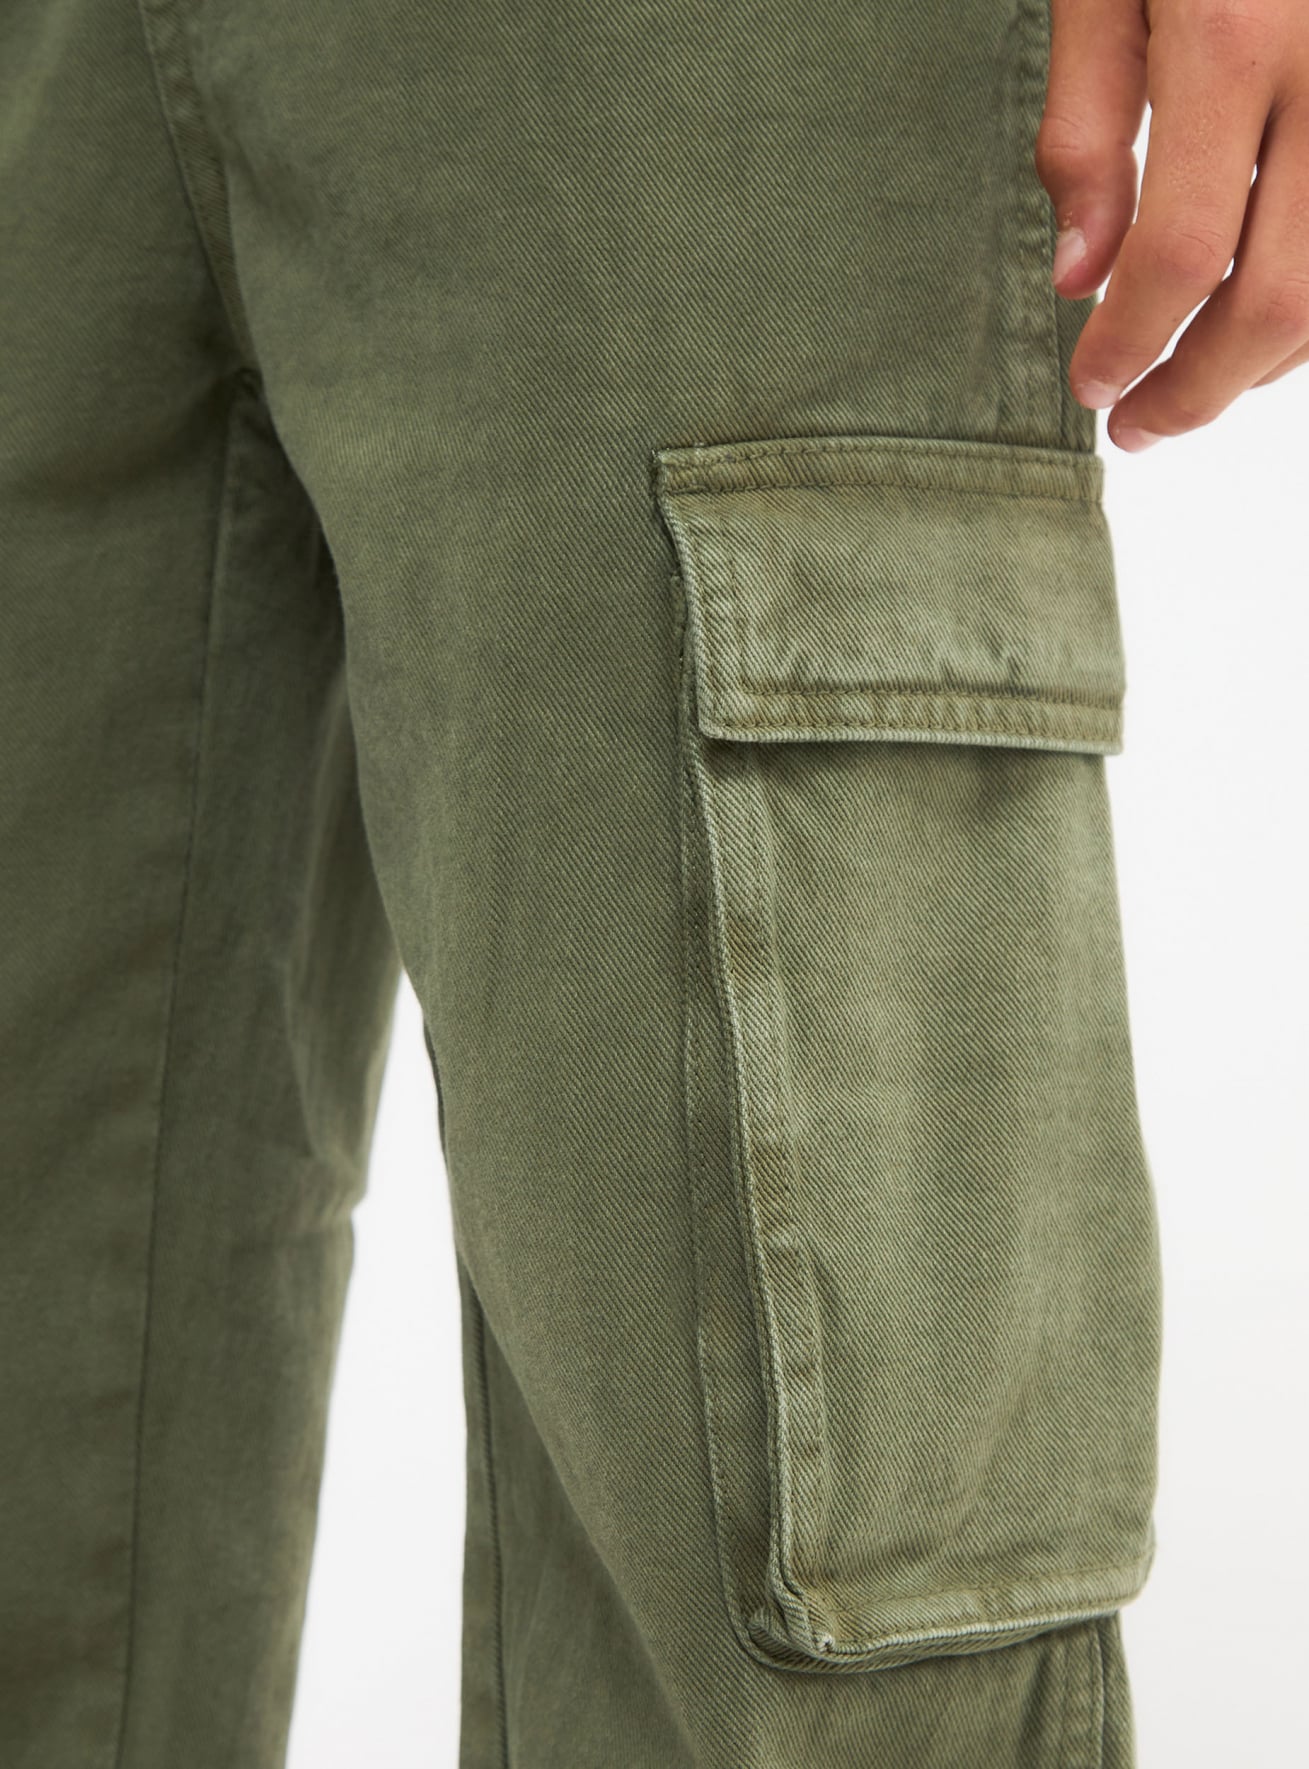 Champion Youth Boy's Reverse Weave Cargo Joggers Pants (Olive Green, Small  S, 8) | eBay